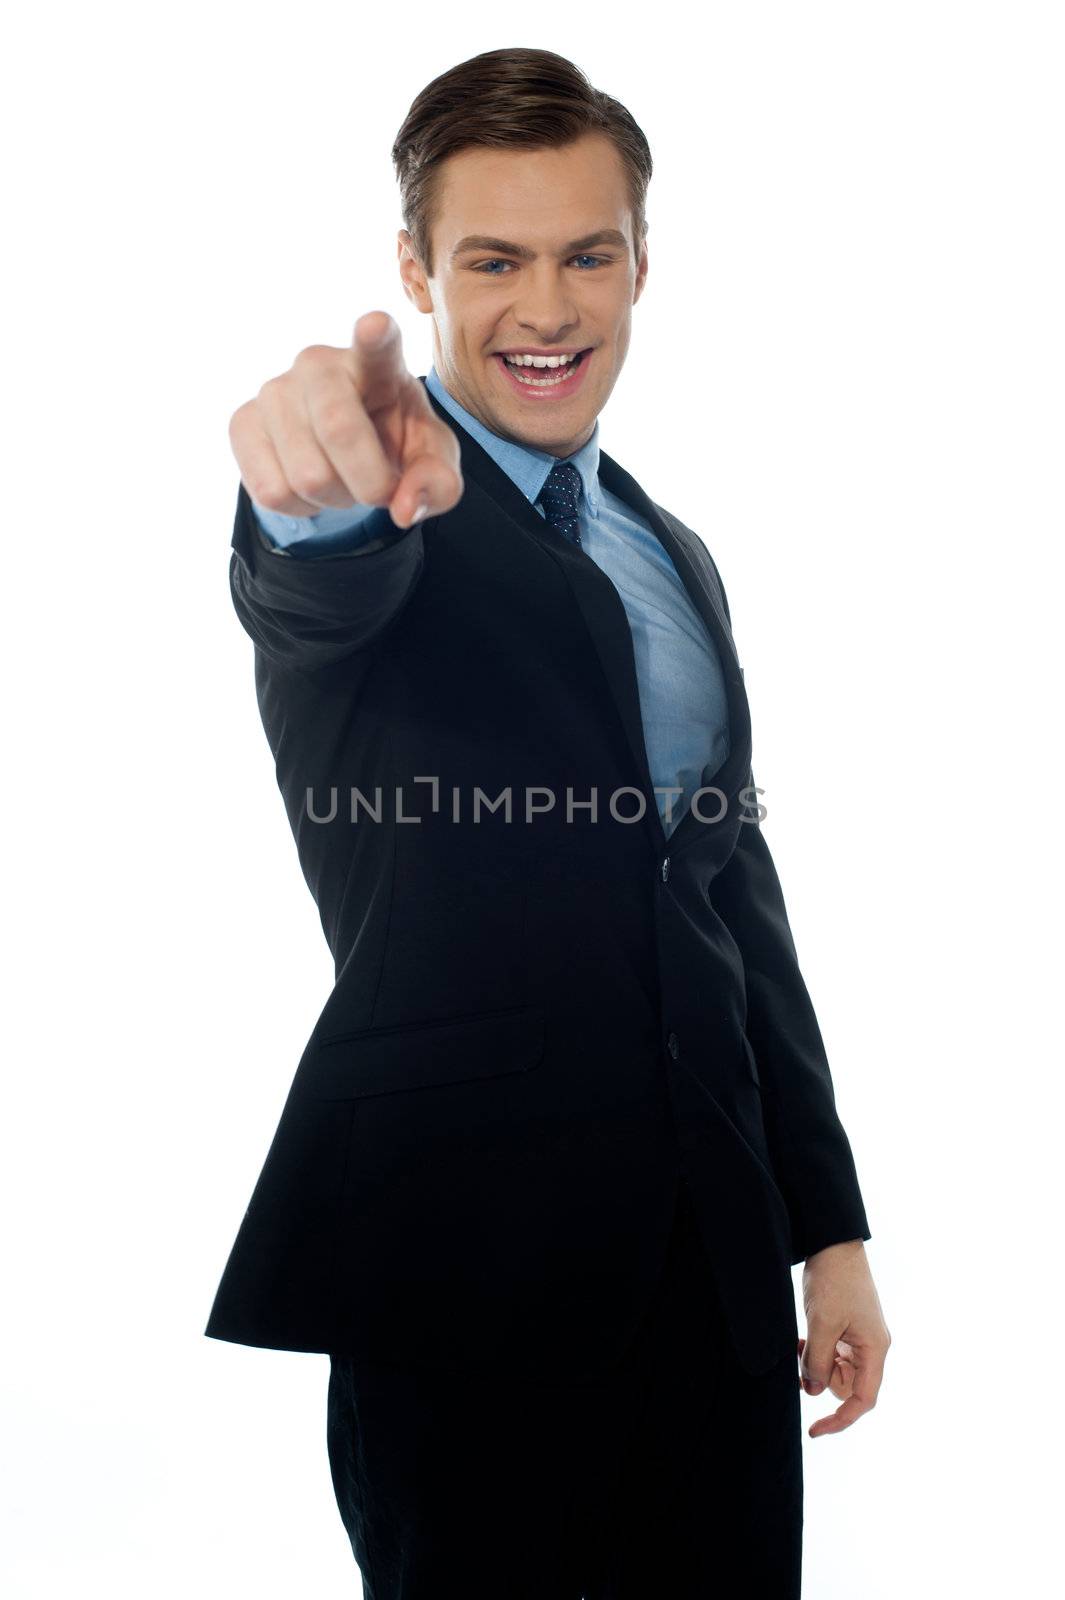 Smiling young executive pointing at you in black suit on white background